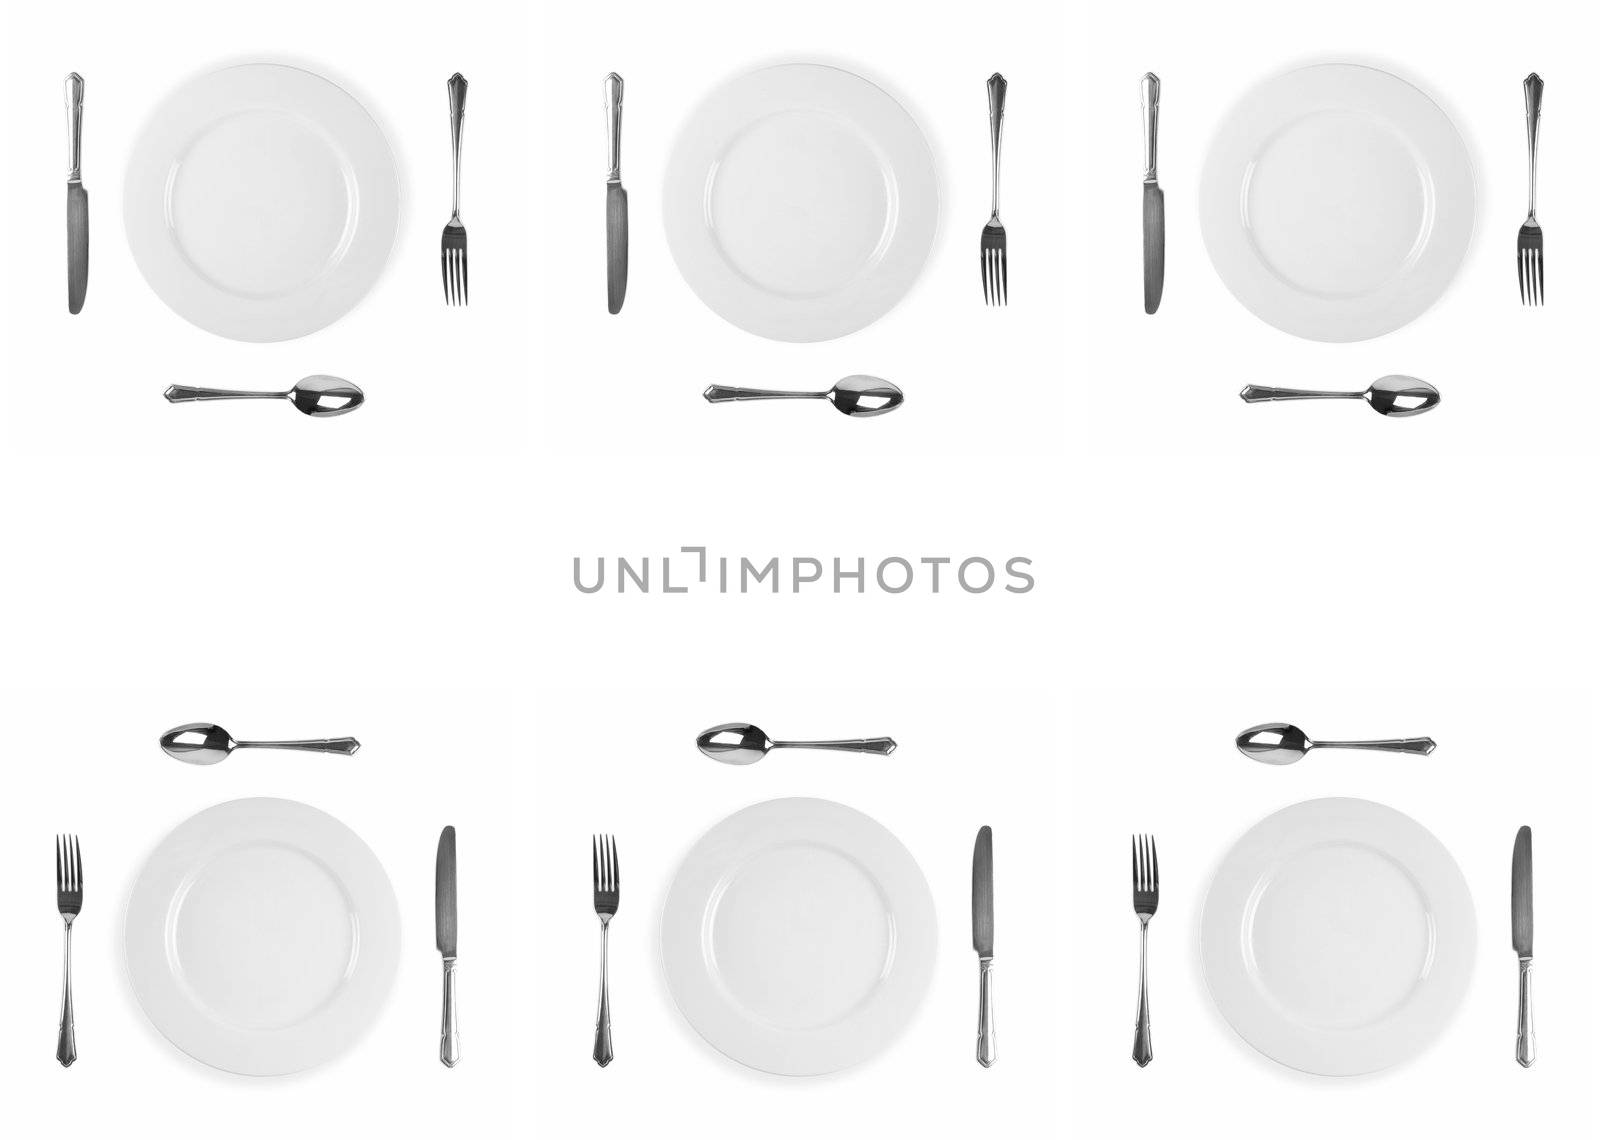 Image composite of six plate cuterly setting with knife, fork, plate and spoon